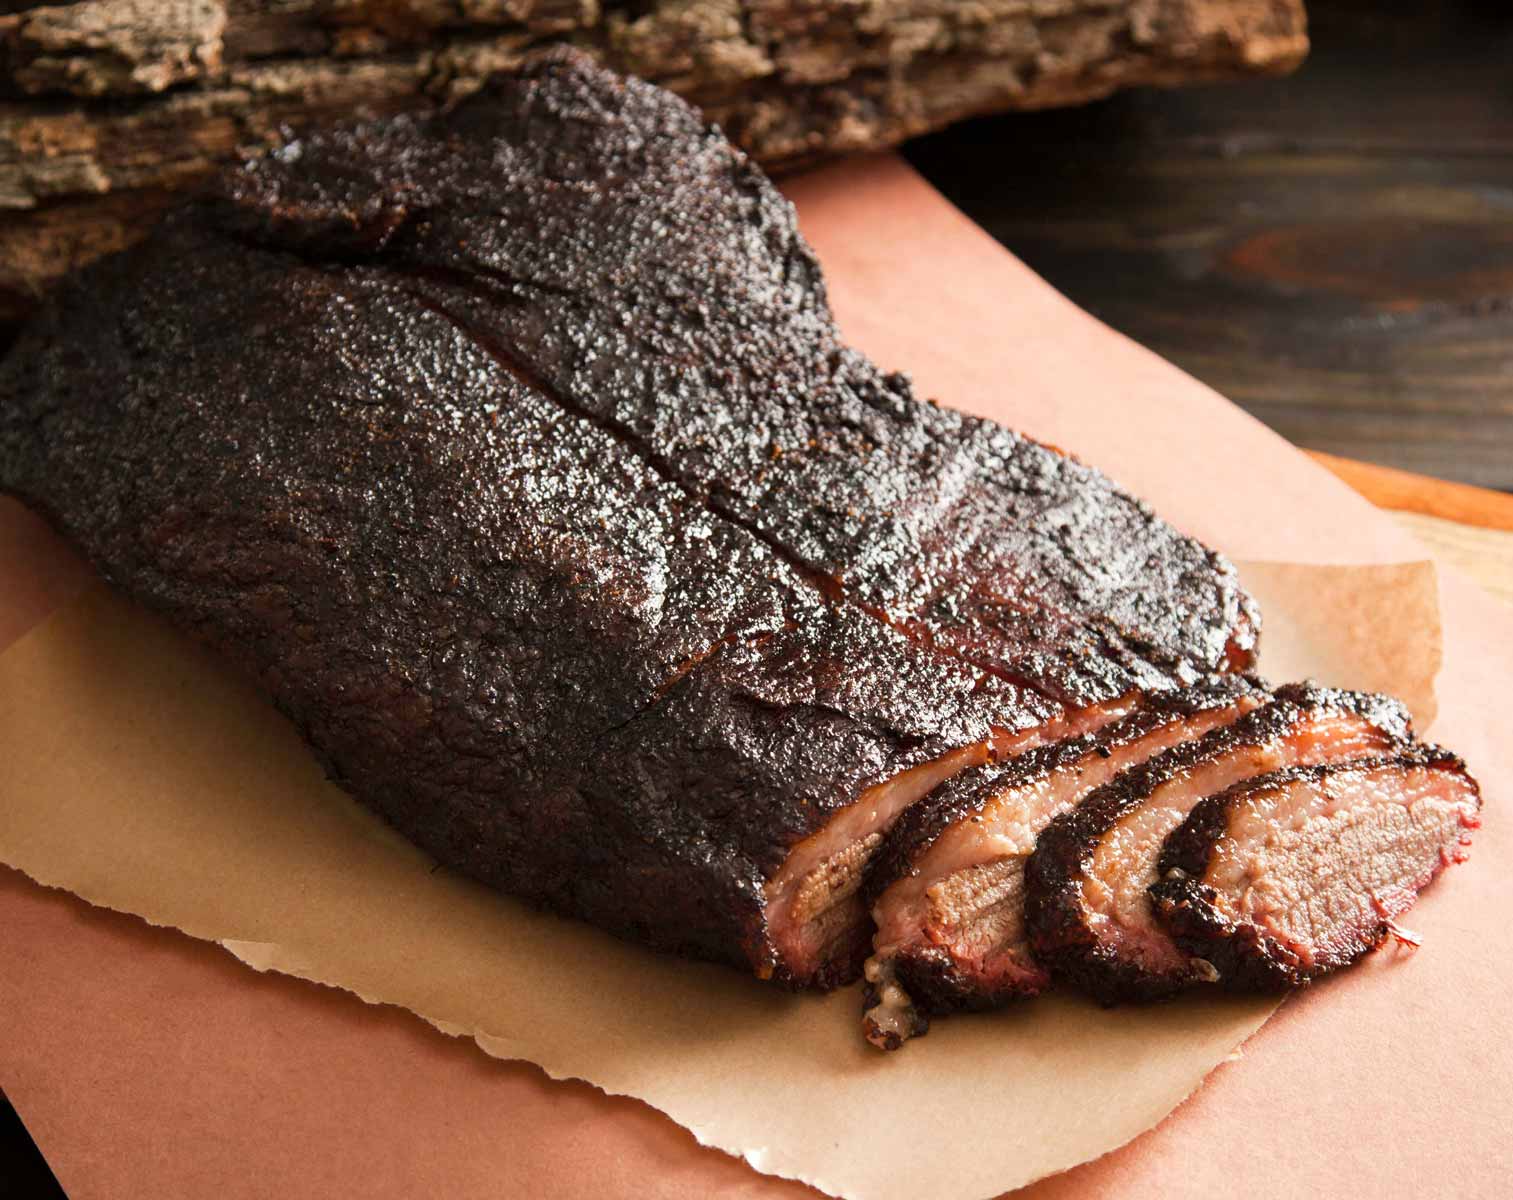 Whole, fully smoked, sliced Texas brisket from Southside Market & BBQ, the oldest BBQ joint in the state of Texas.